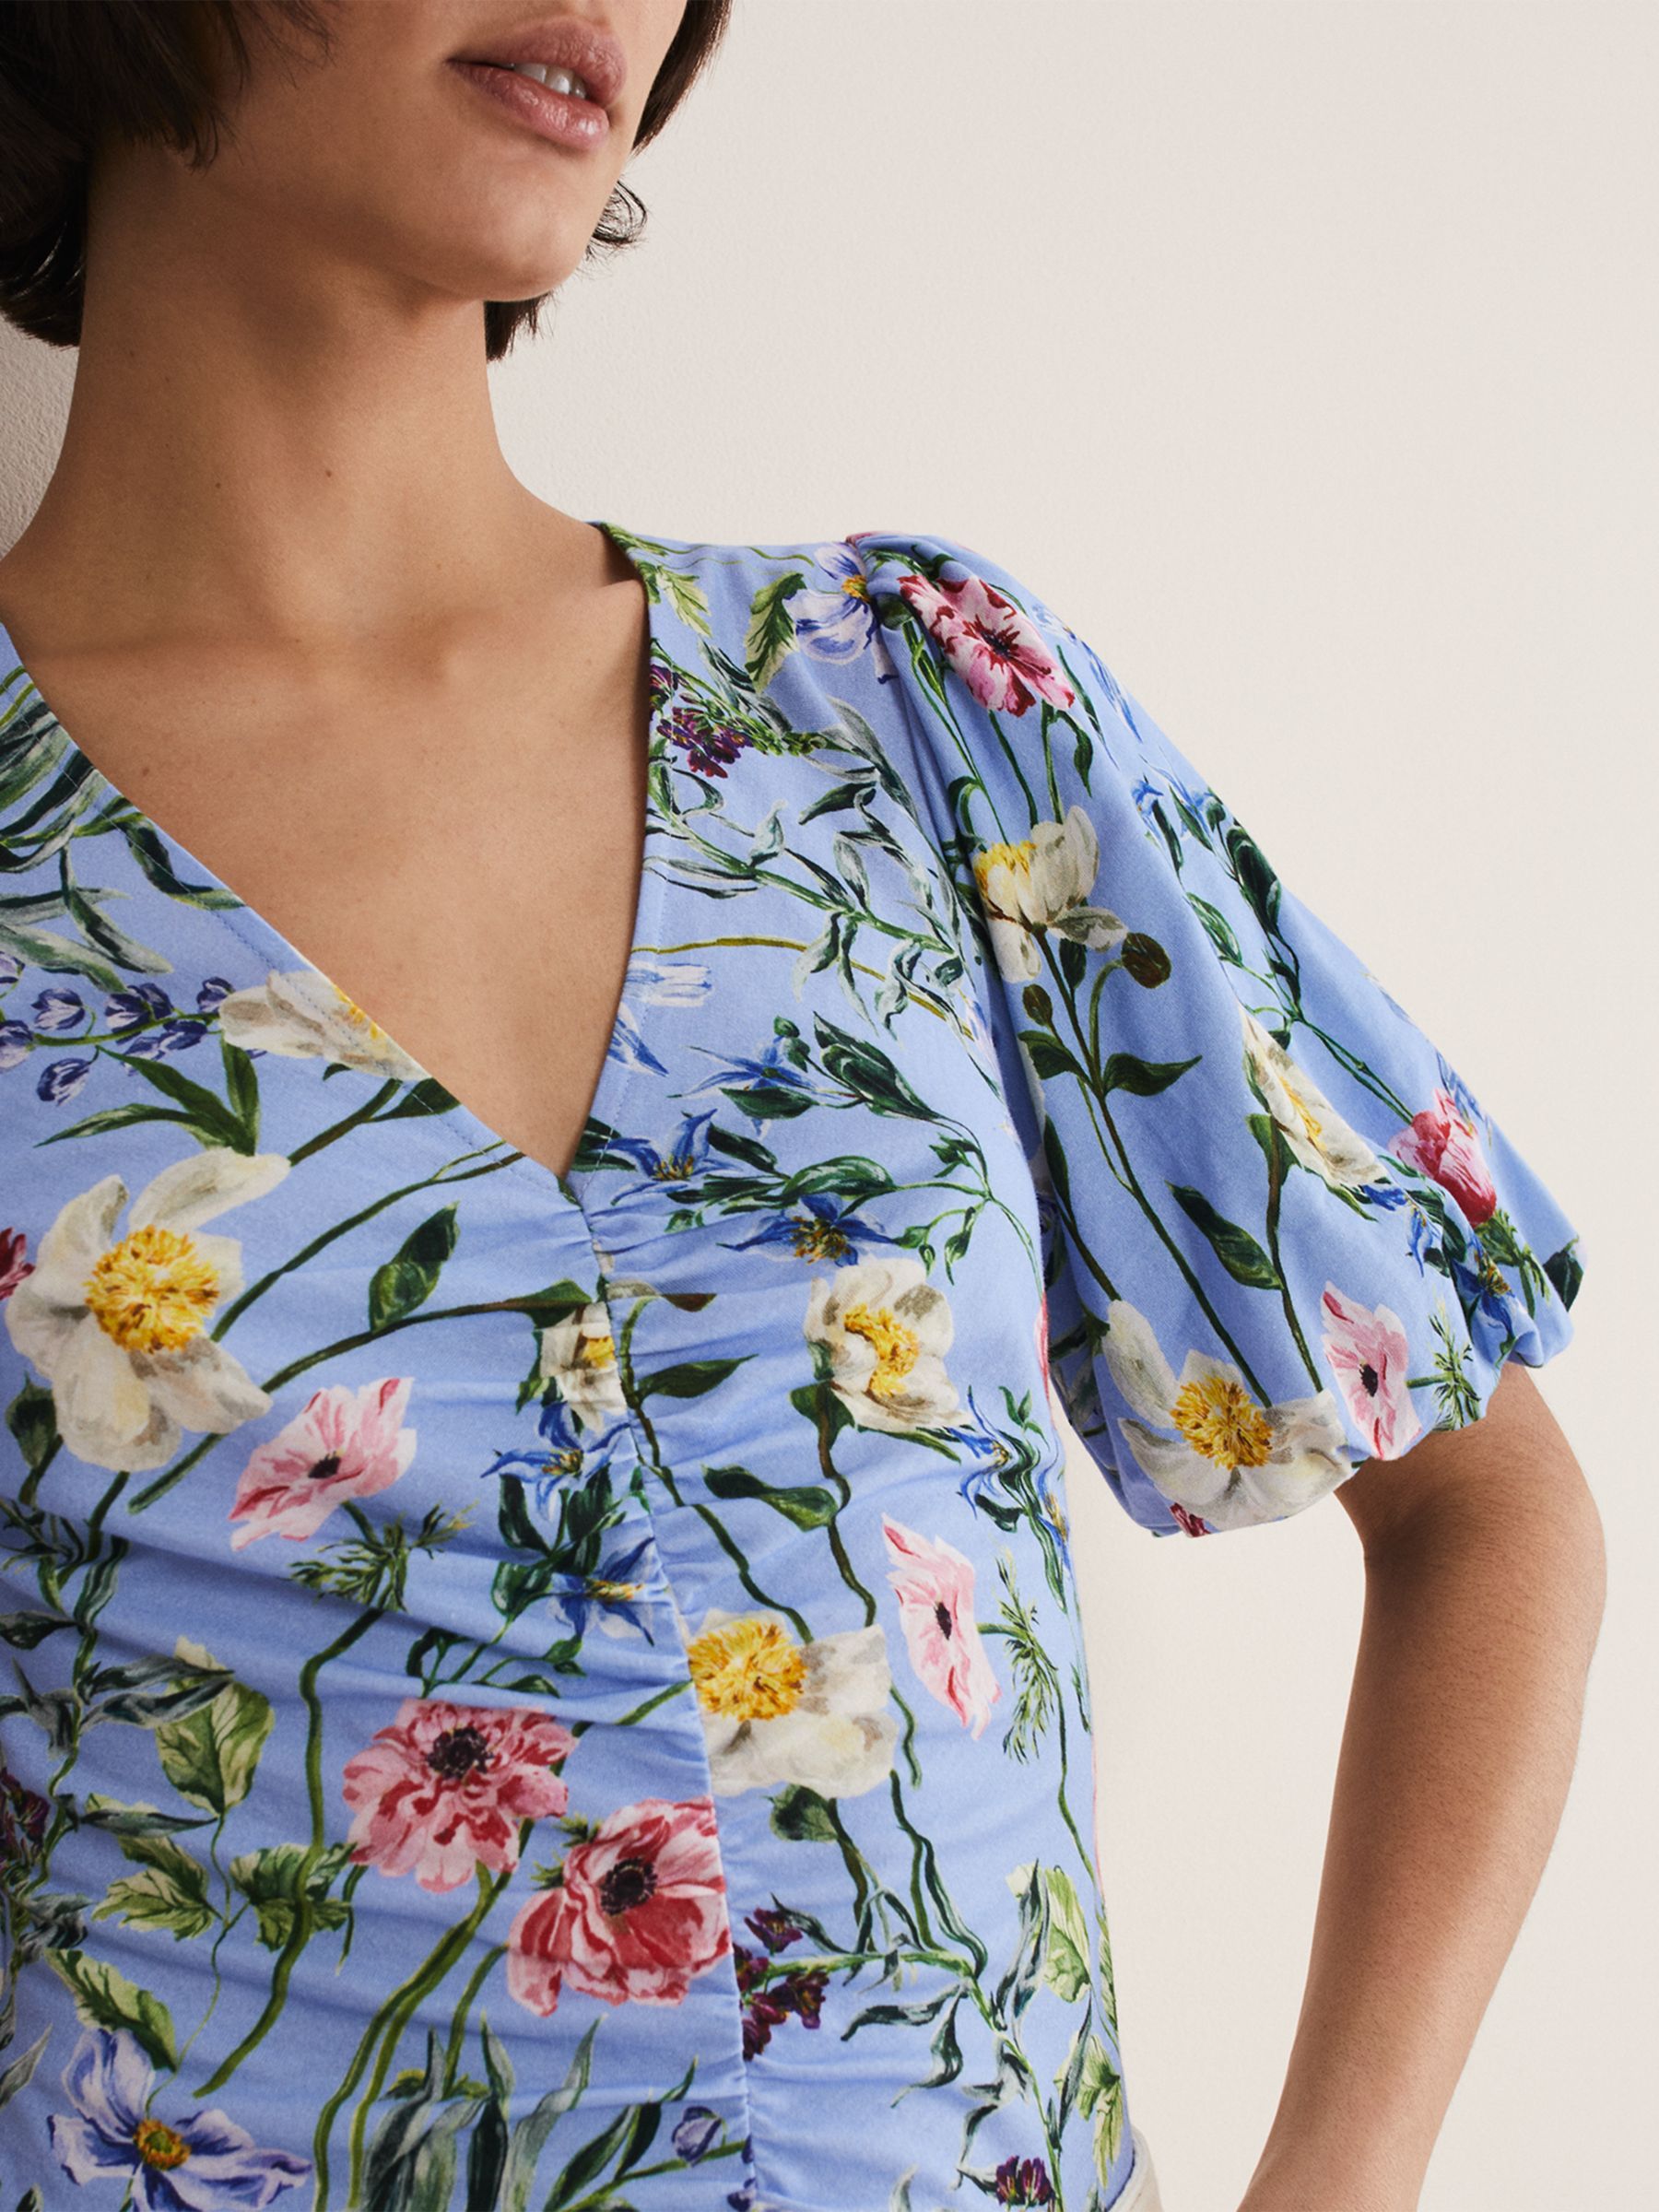 Buy Phase Eight Donda Floral Print Blouse, Blue/Multi Online at johnlewis.com